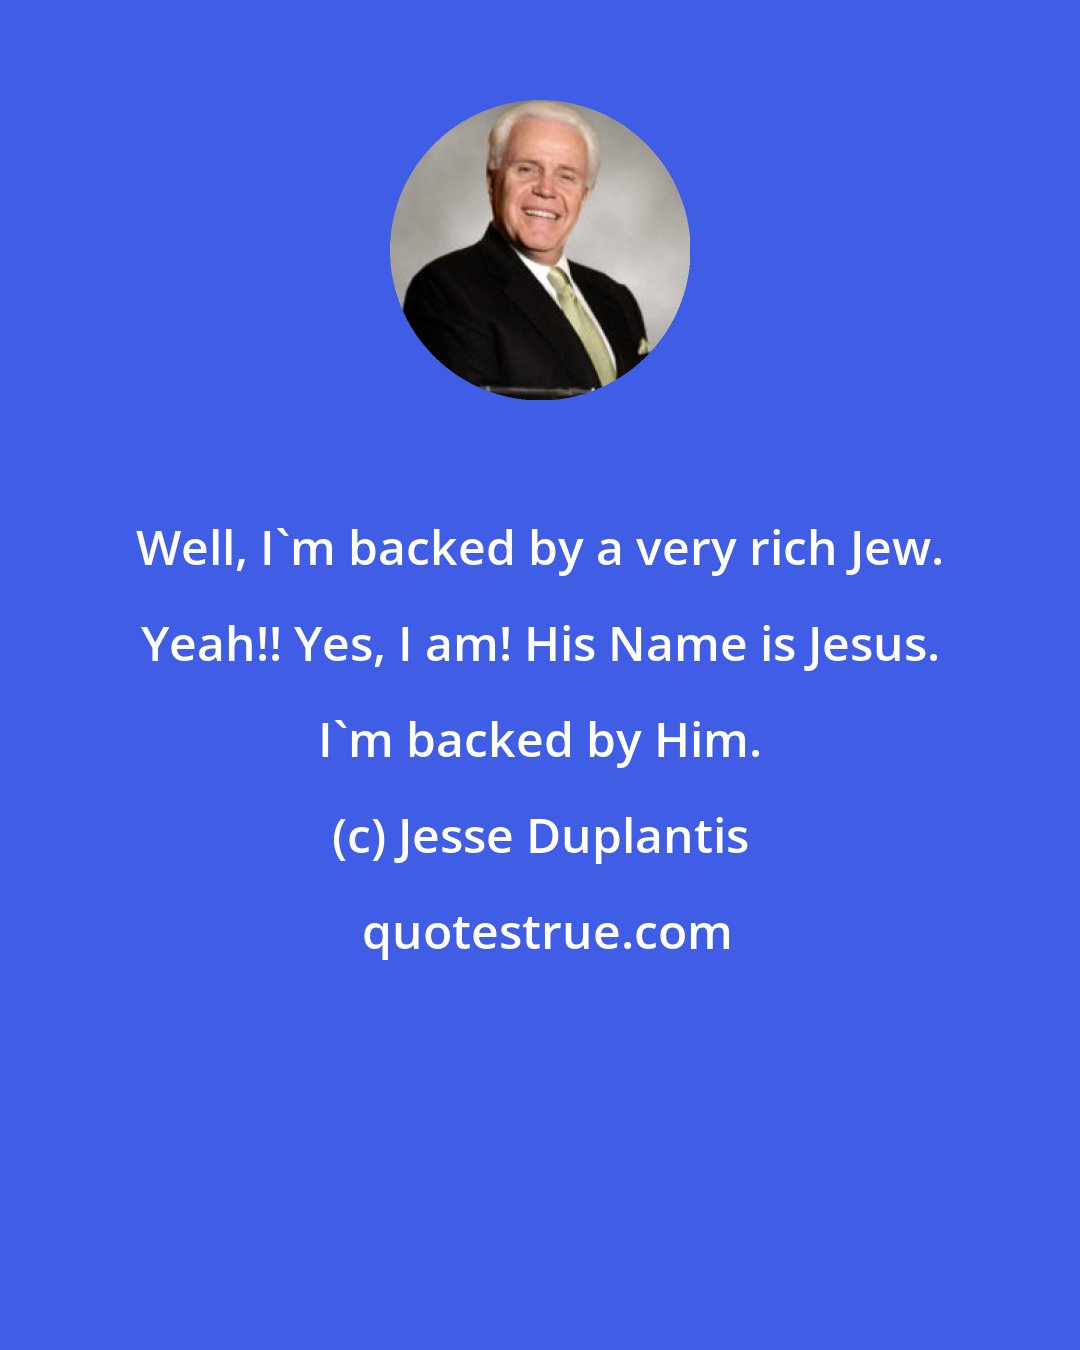 Jesse Duplantis: Well, I'm backed by a very rich Jew. Yeah!! Yes, I am! His Name is Jesus. I'm backed by Him.